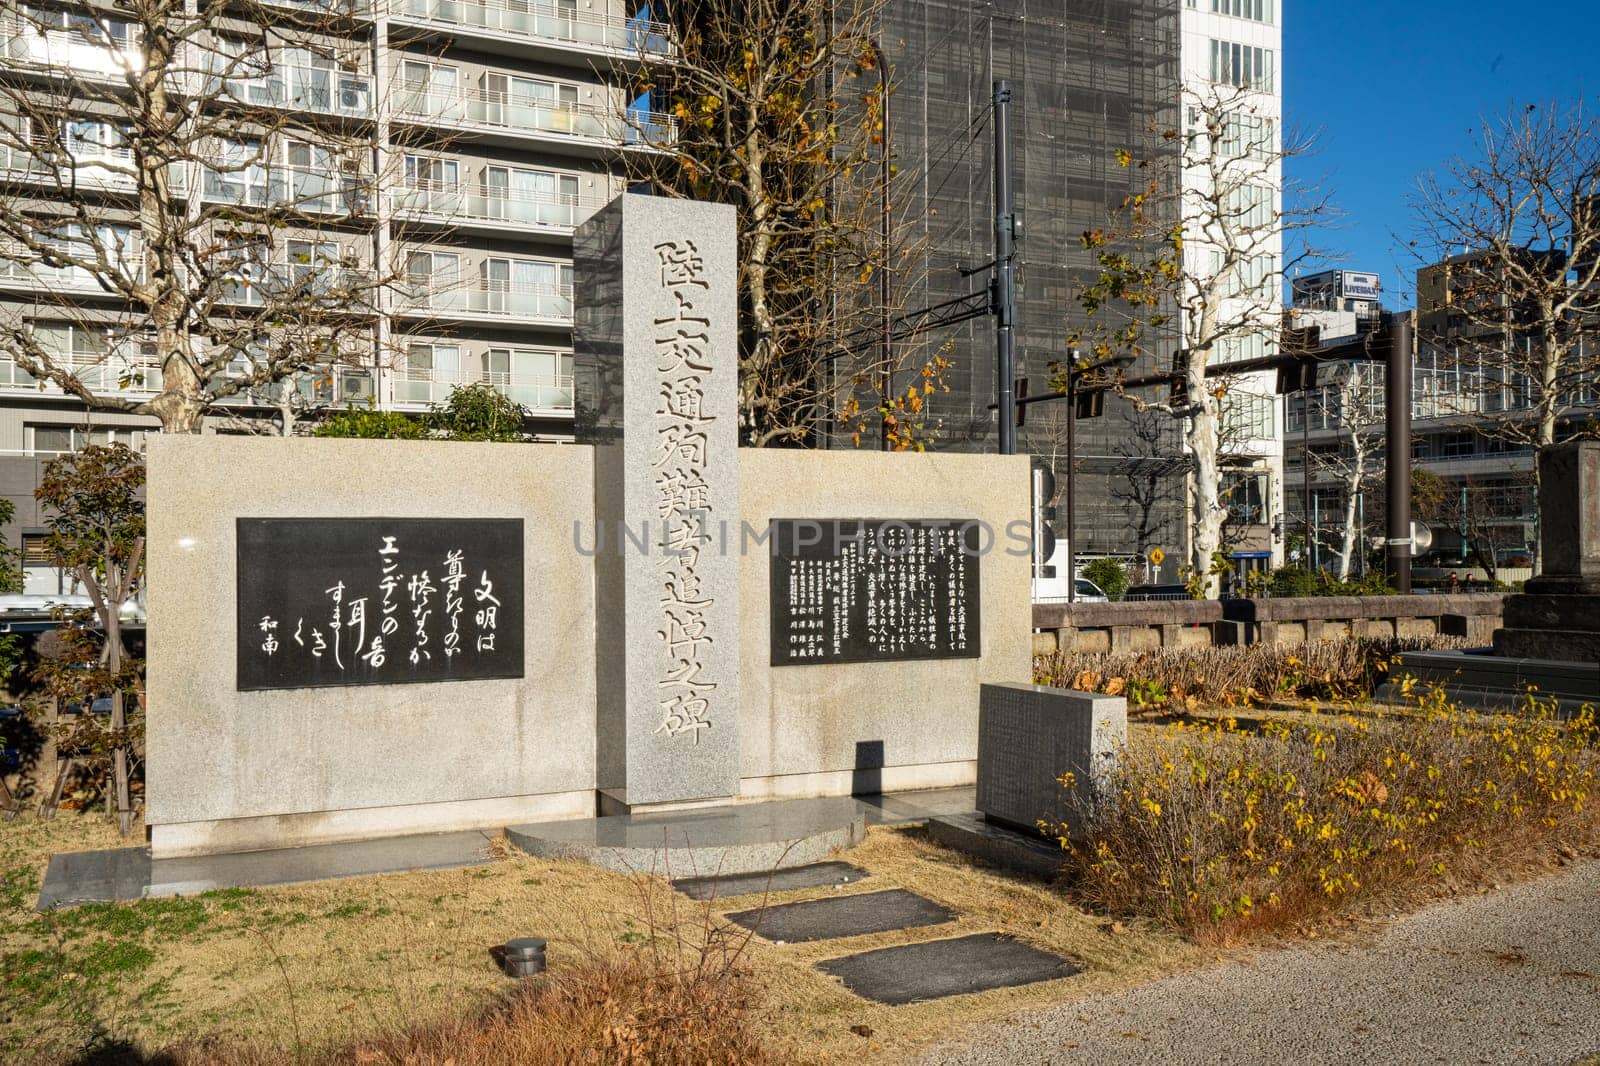  Memorial to the Land Traffic Accident Victims in Tokyo, Japan by sergiodv